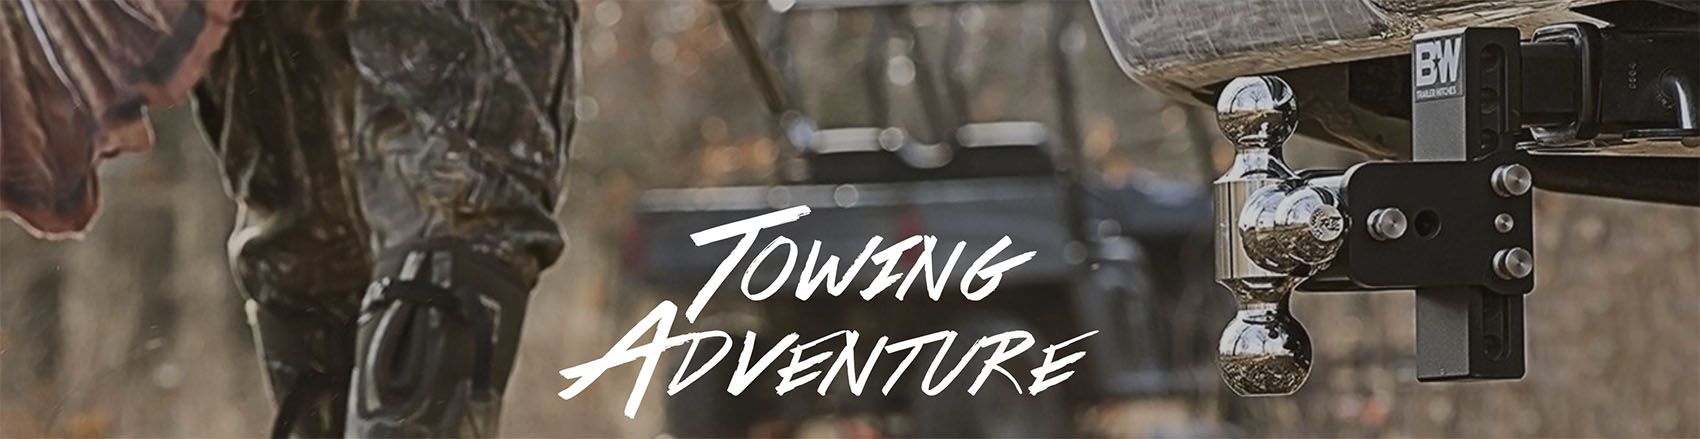 A poster for towing adventure shows a person riding a horse